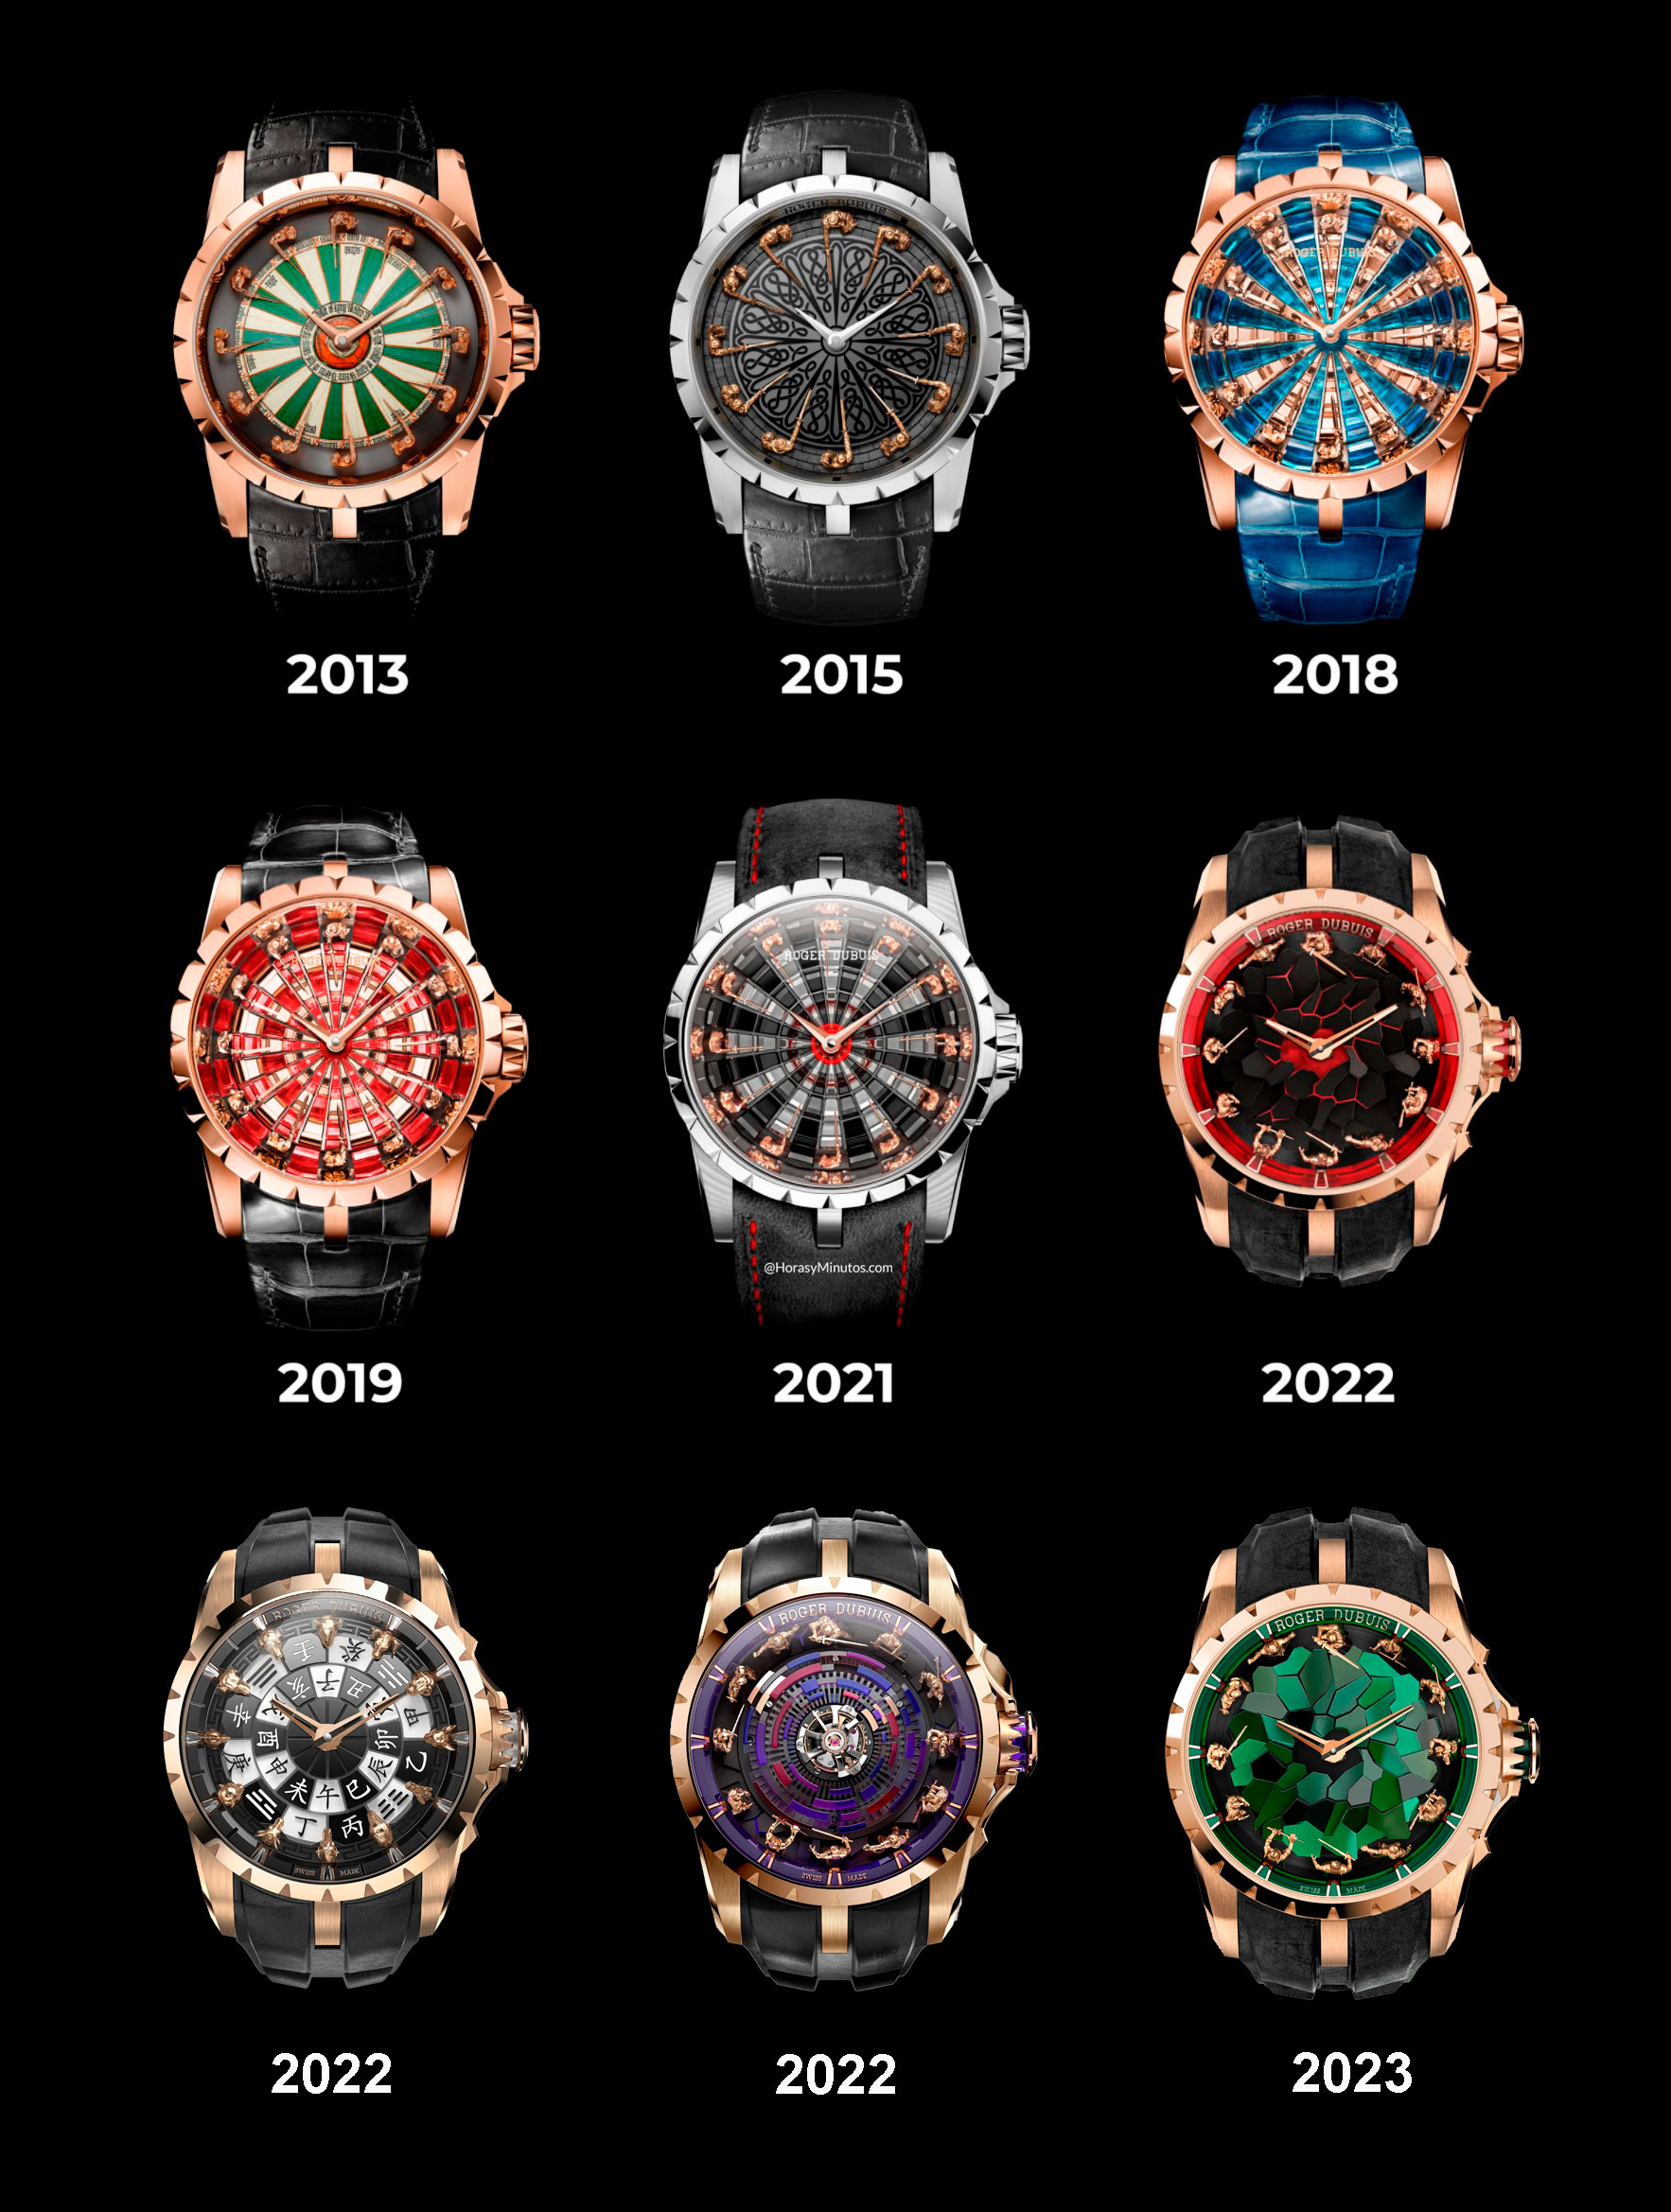 Historia de los Roger Dubuis Knights of the Round Table 